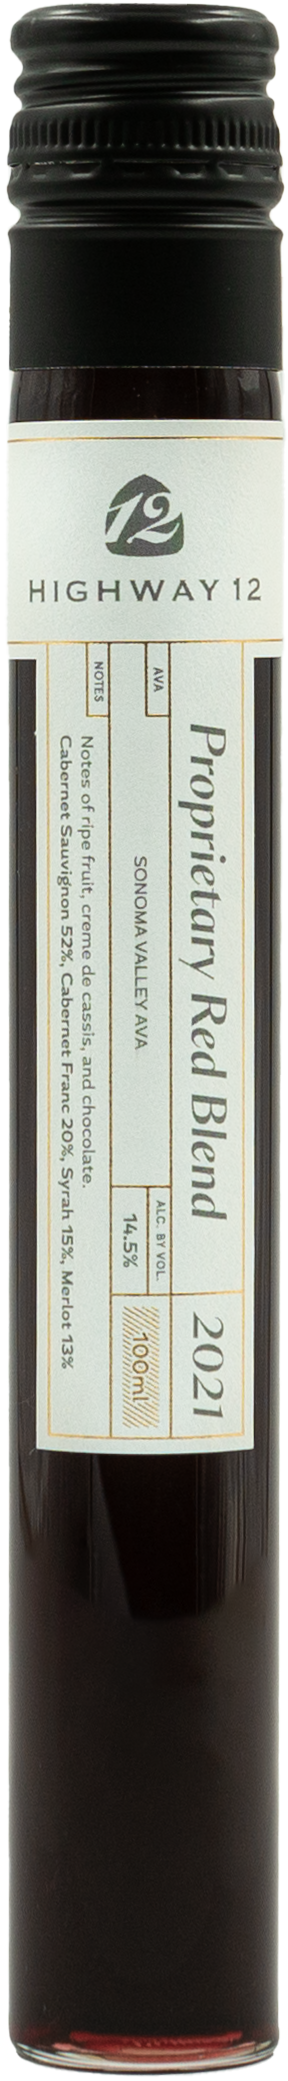 Highway 12 Winery Proprietary Red Blend (2021)